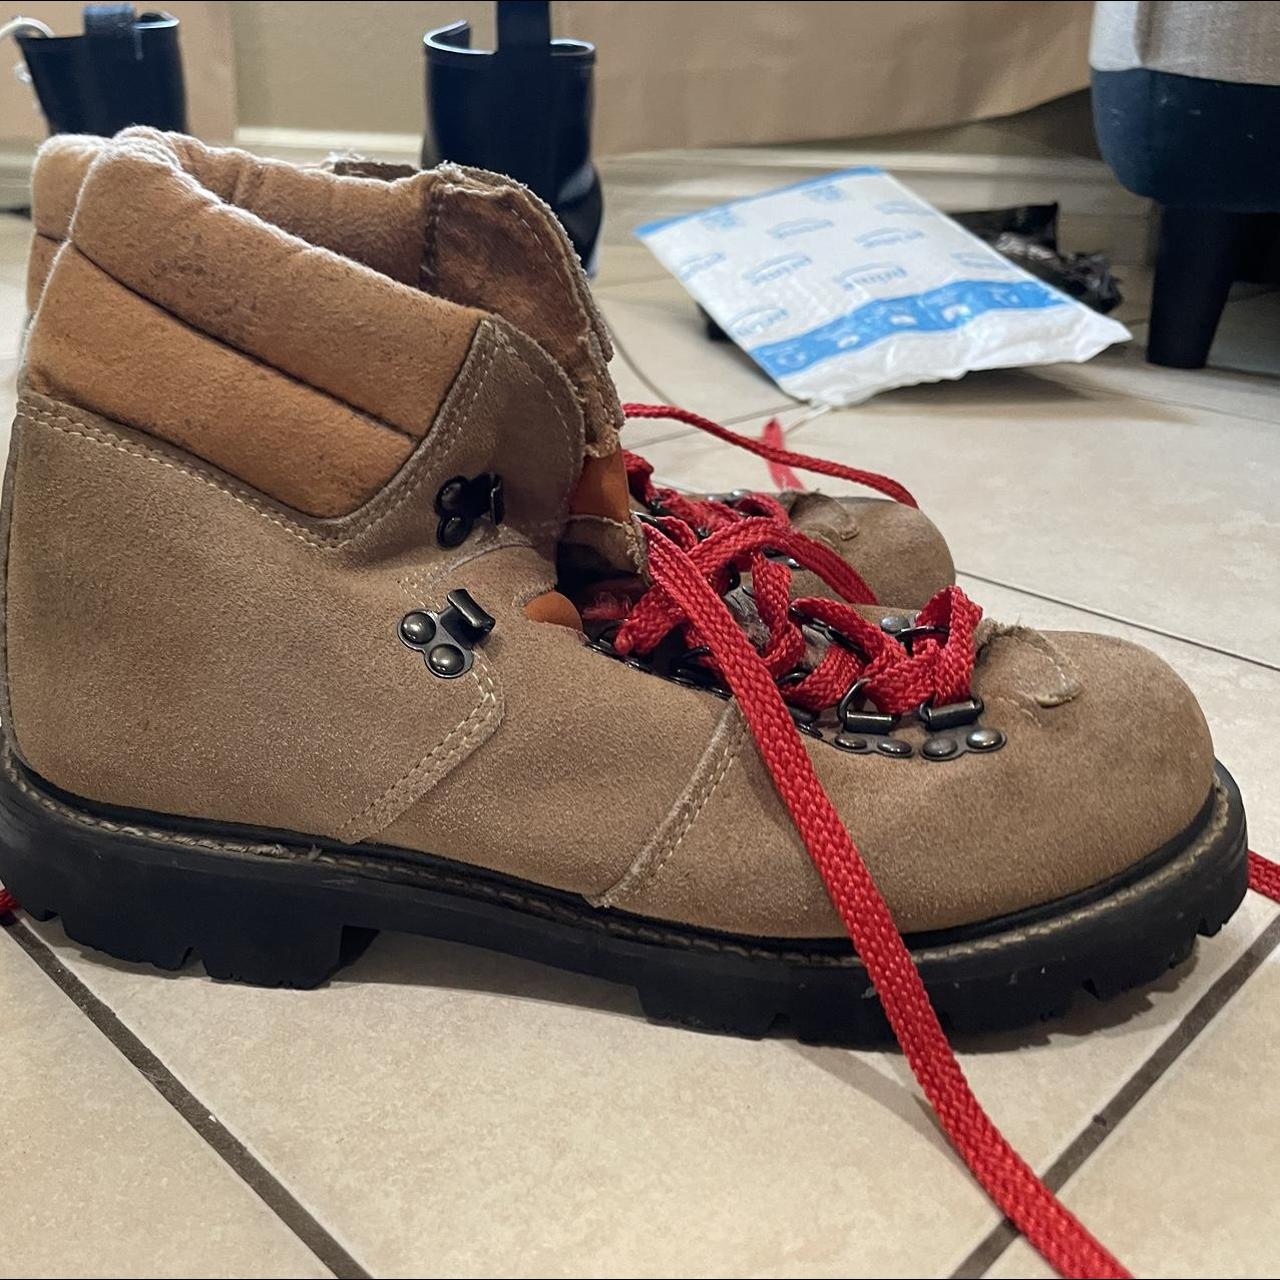 Vintage Montblanc hiking boots Red laces Tear in... - Depop